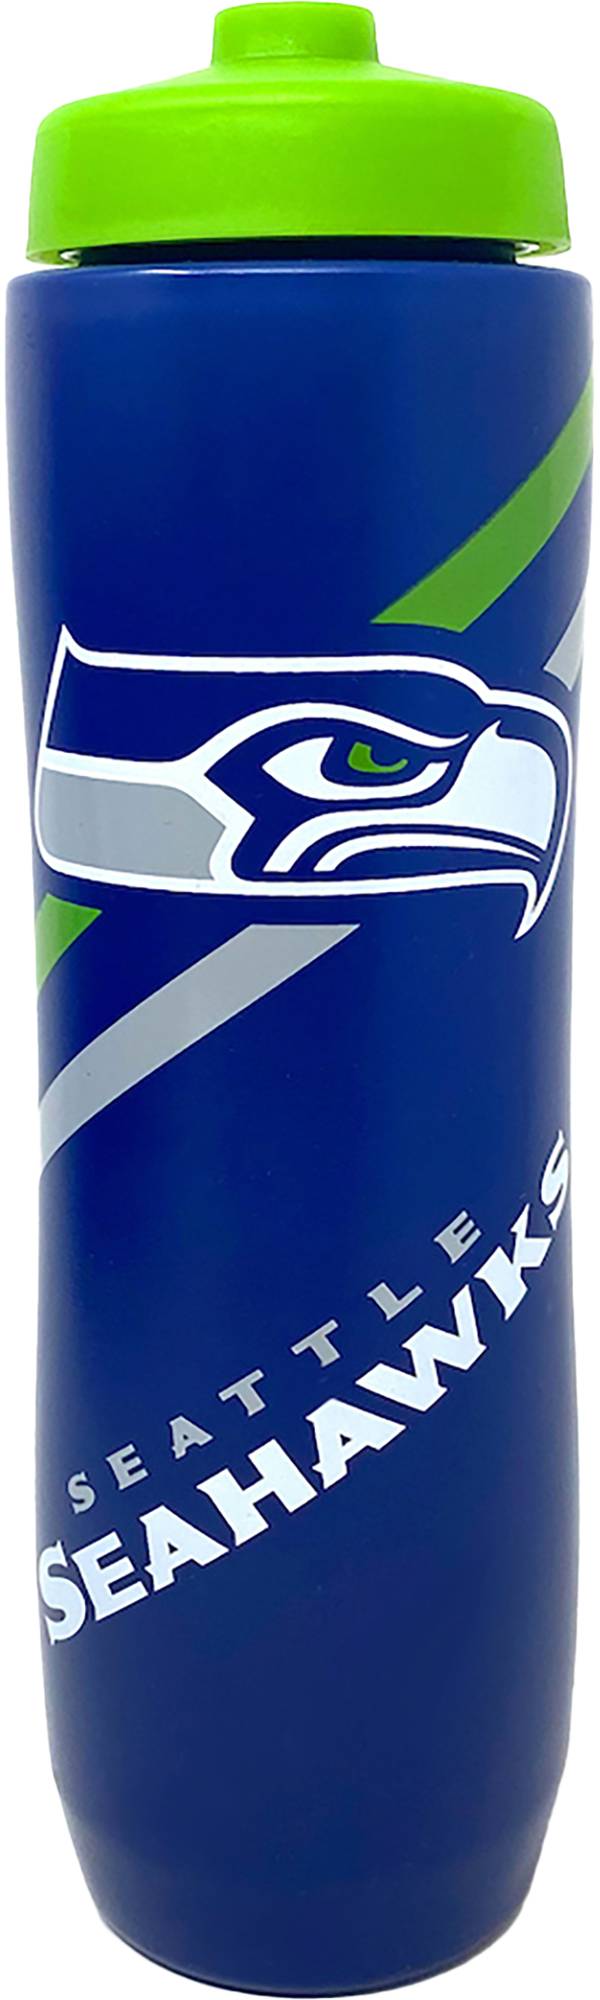 Party Animal Seattle Seahawks 32 oz. Squeeze Water Bottle product image